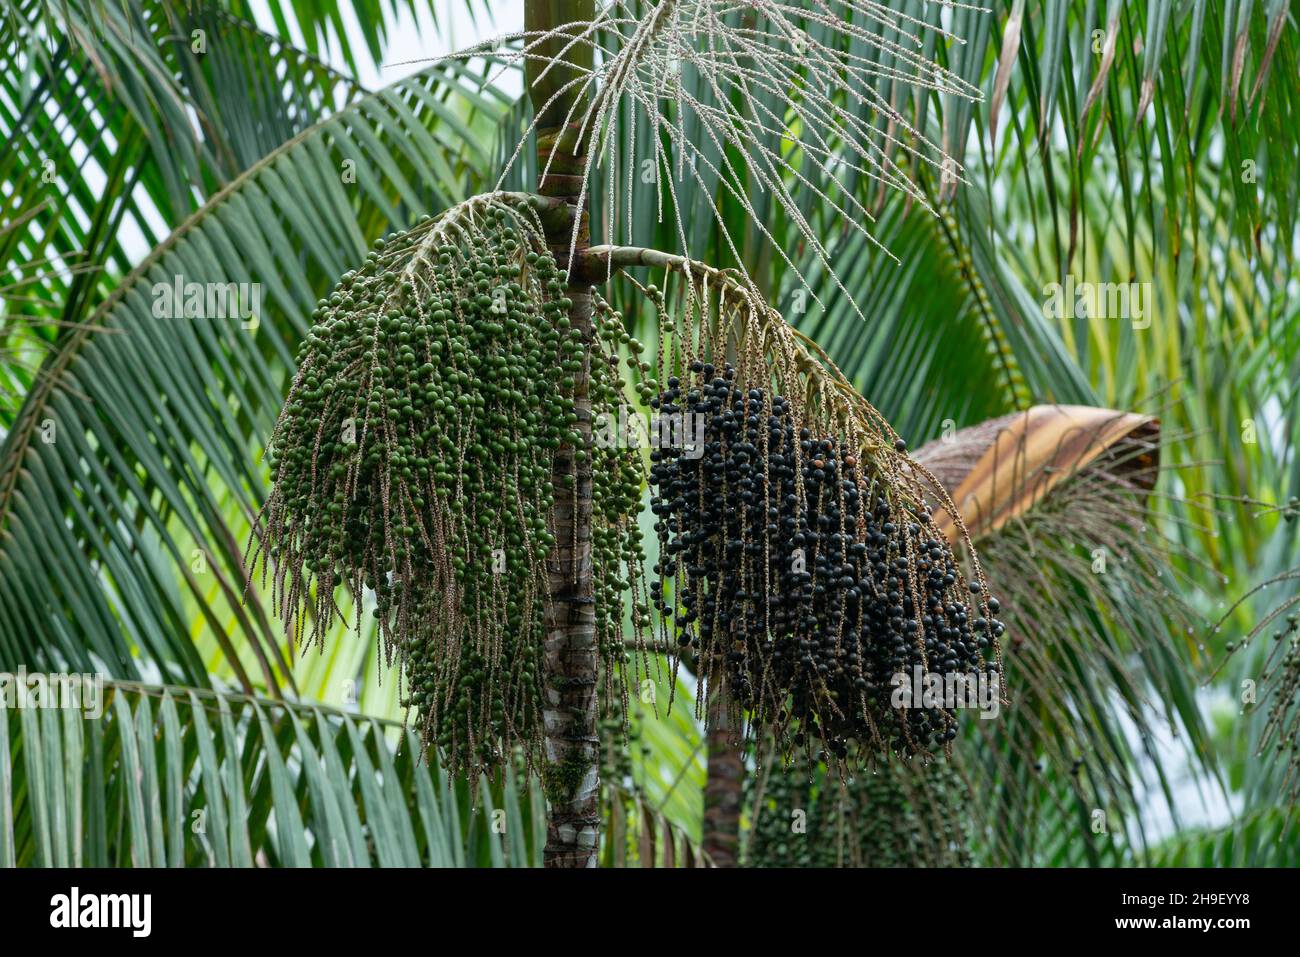 Açai palm trees loaded with berries, from the Amazon Rainforest of Brazil Stock Photo